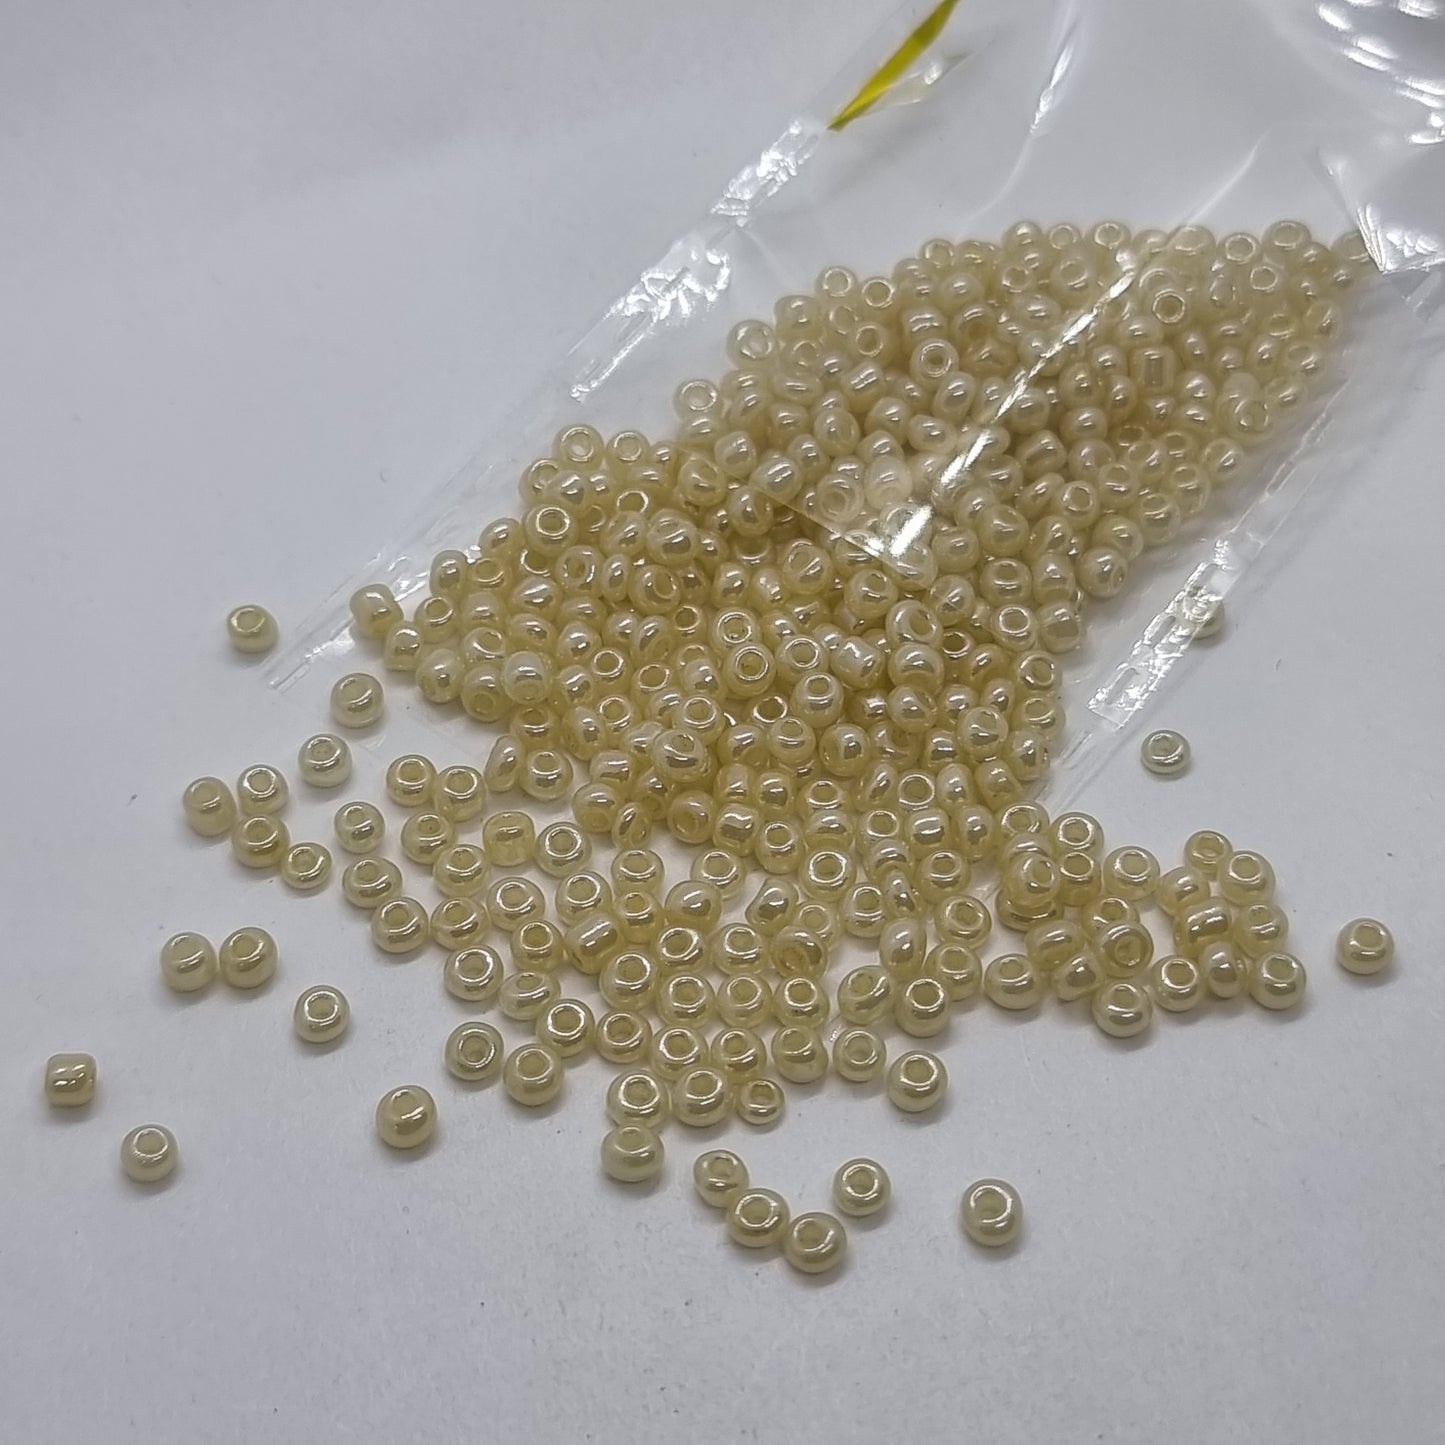 15g 2.5mm Cream Pearlescent Glass Beads